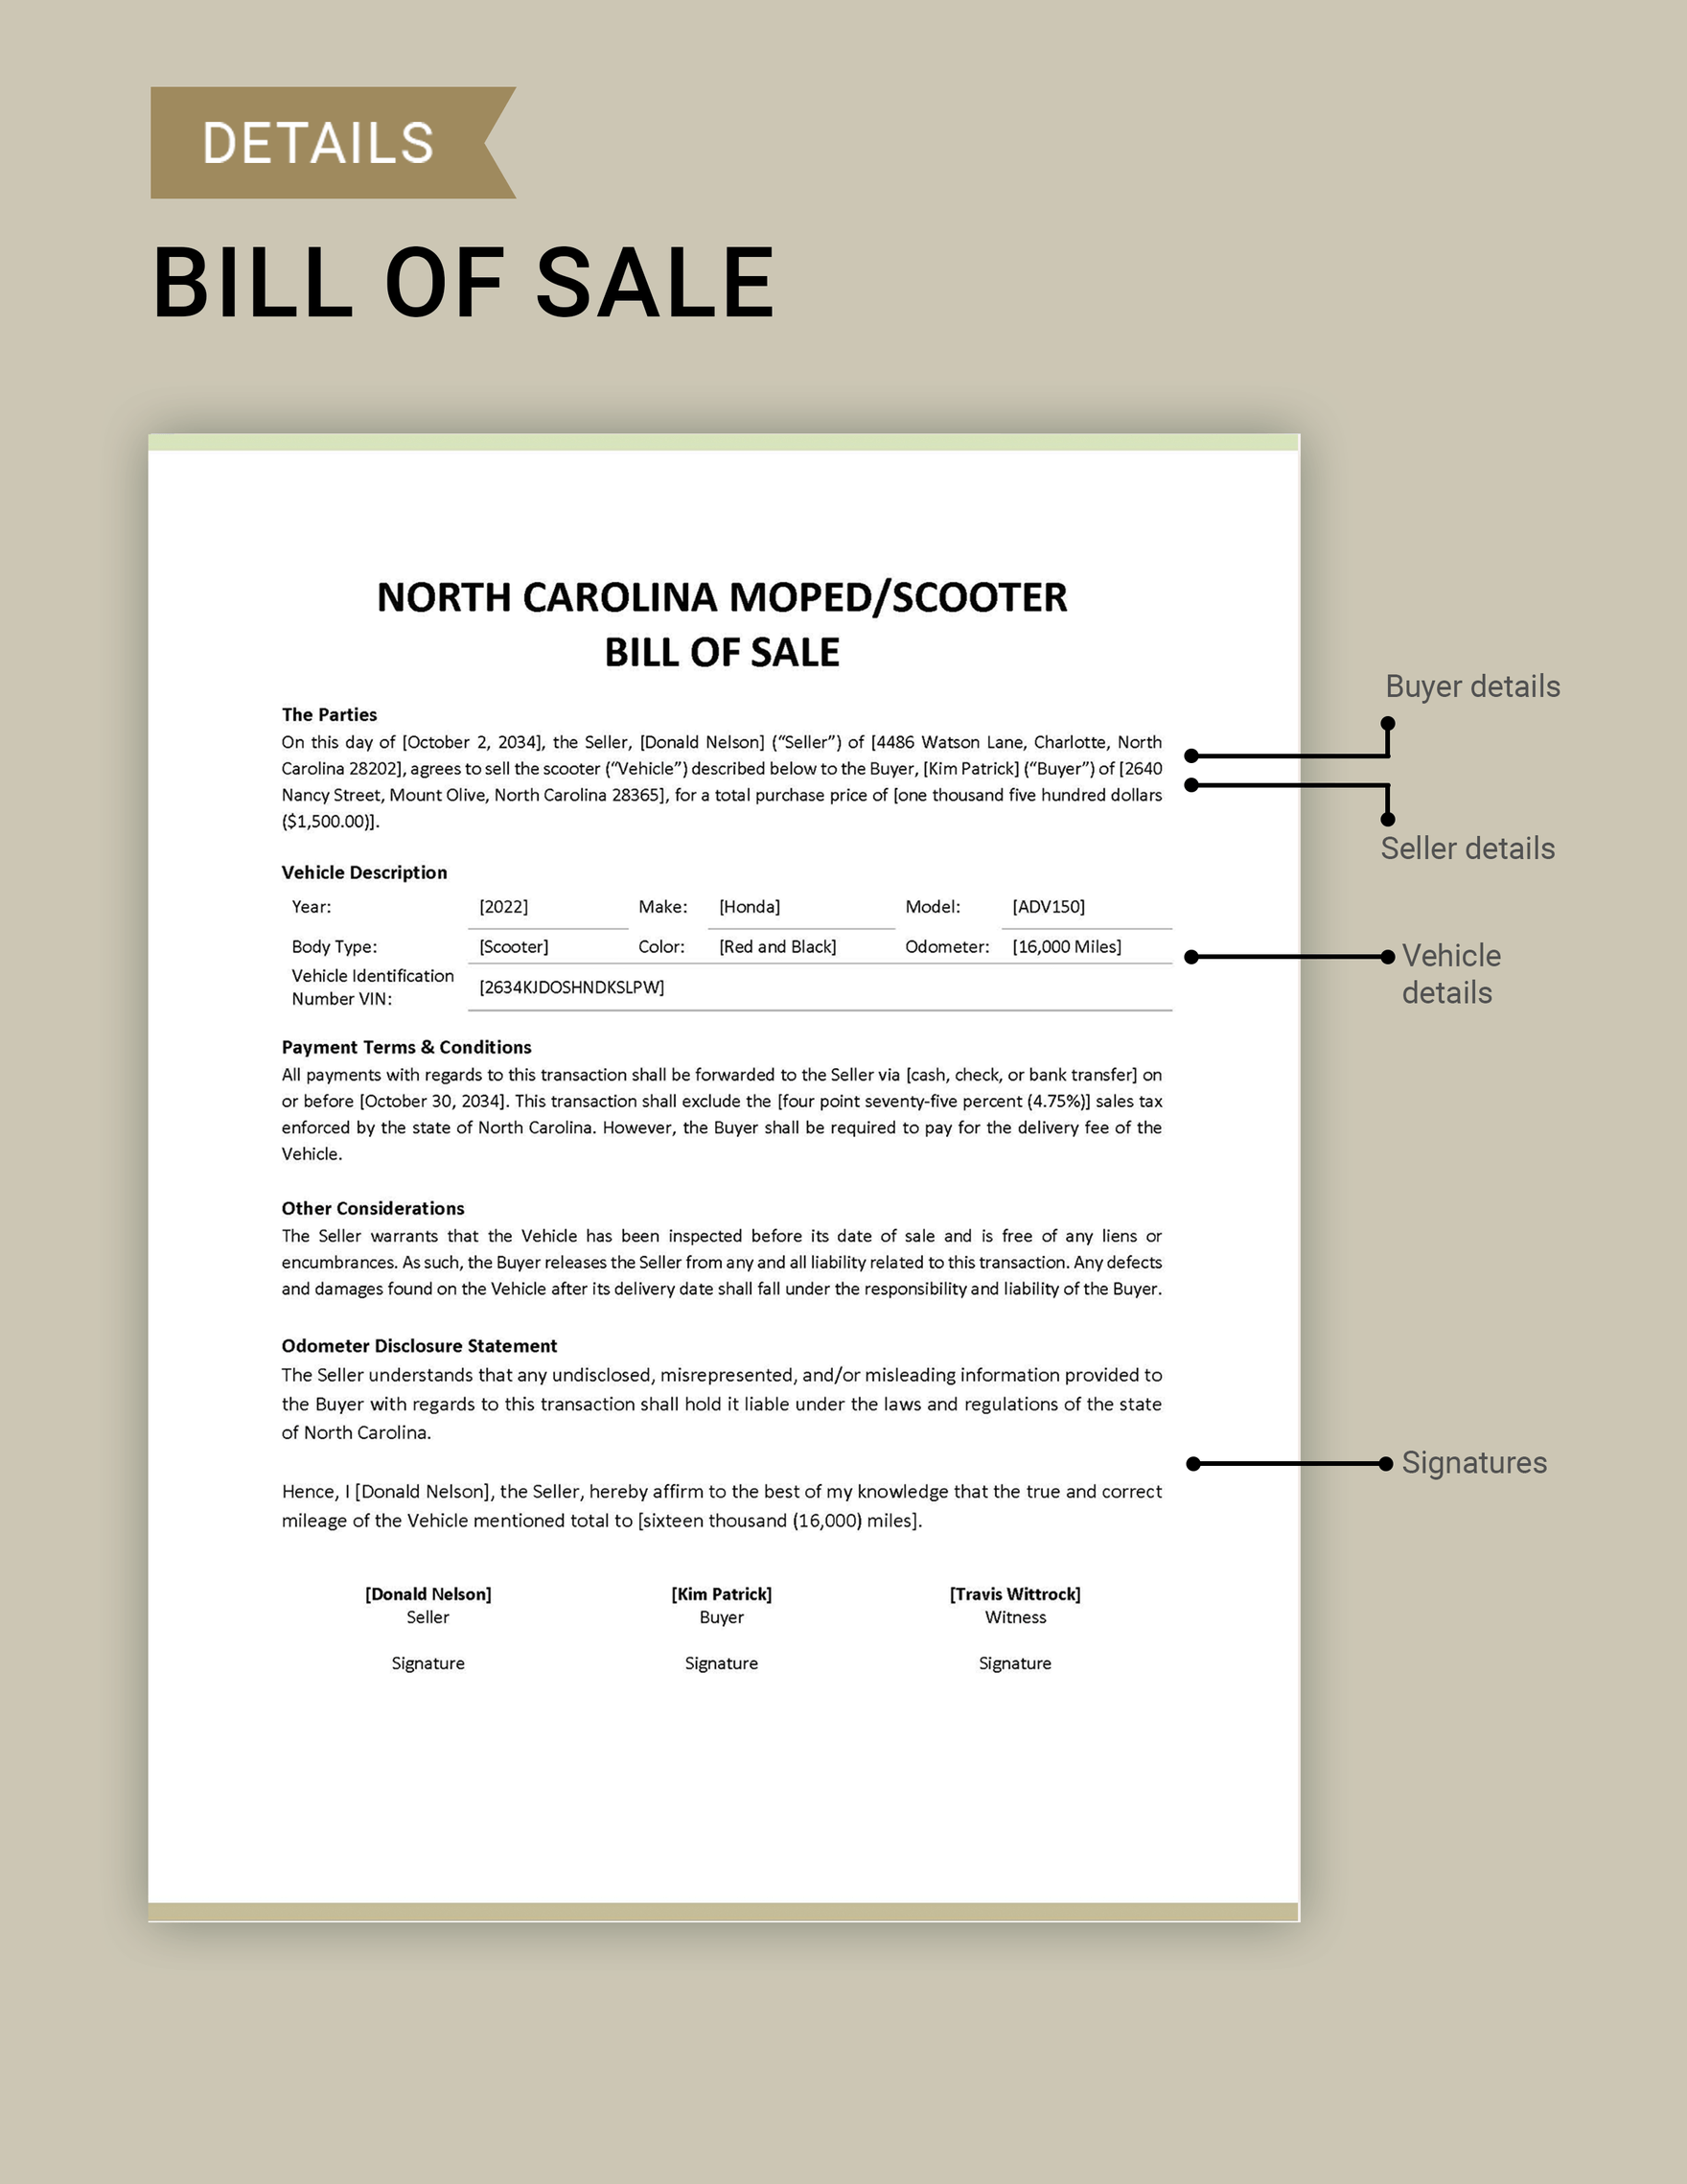 North Carolina Moped / Scooter Bill of Sale Template